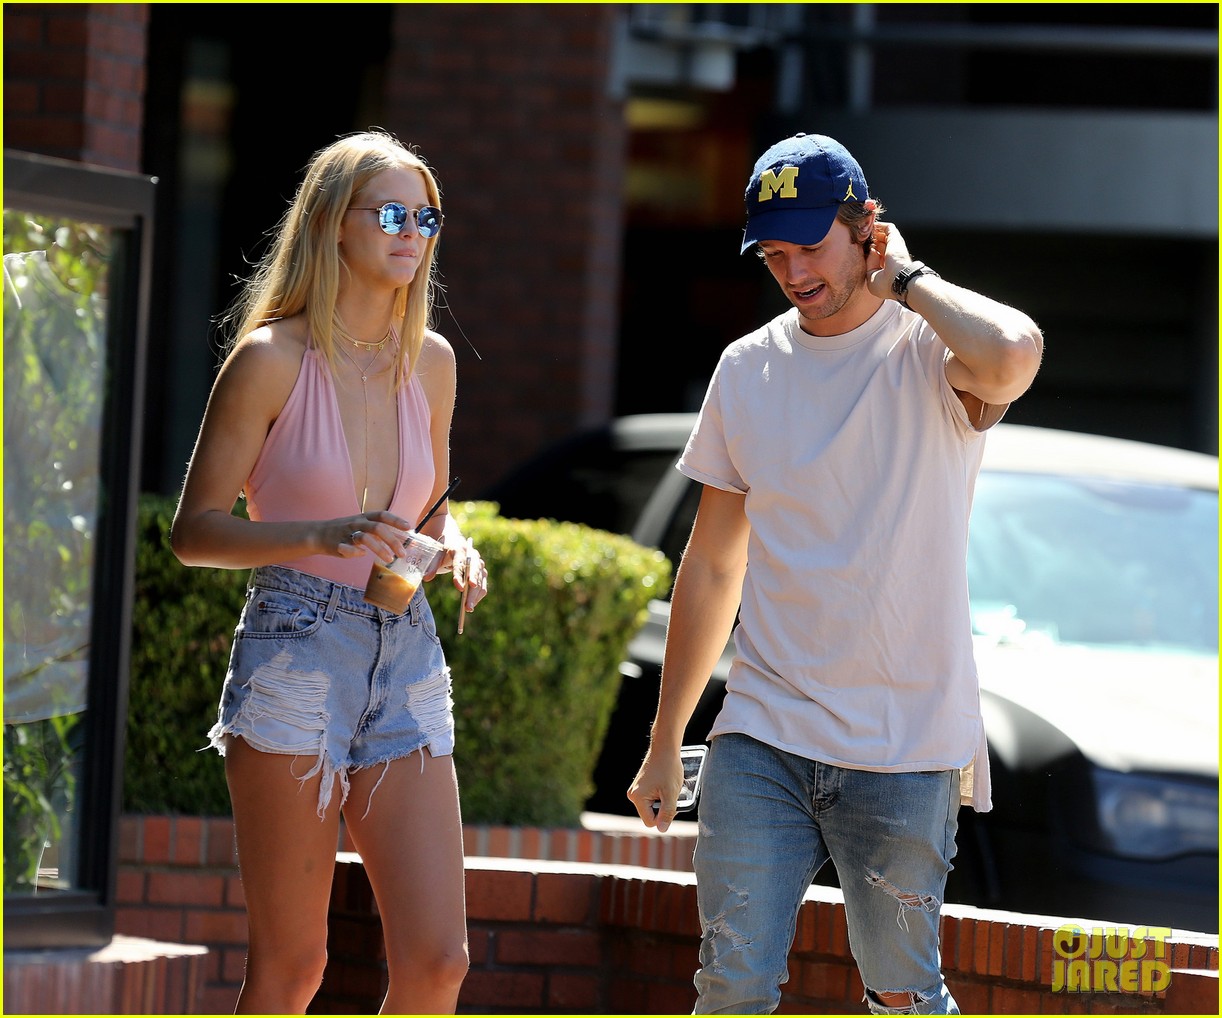 patrick schwarzenegger abby champion grab afternoon snacks brentwood 09